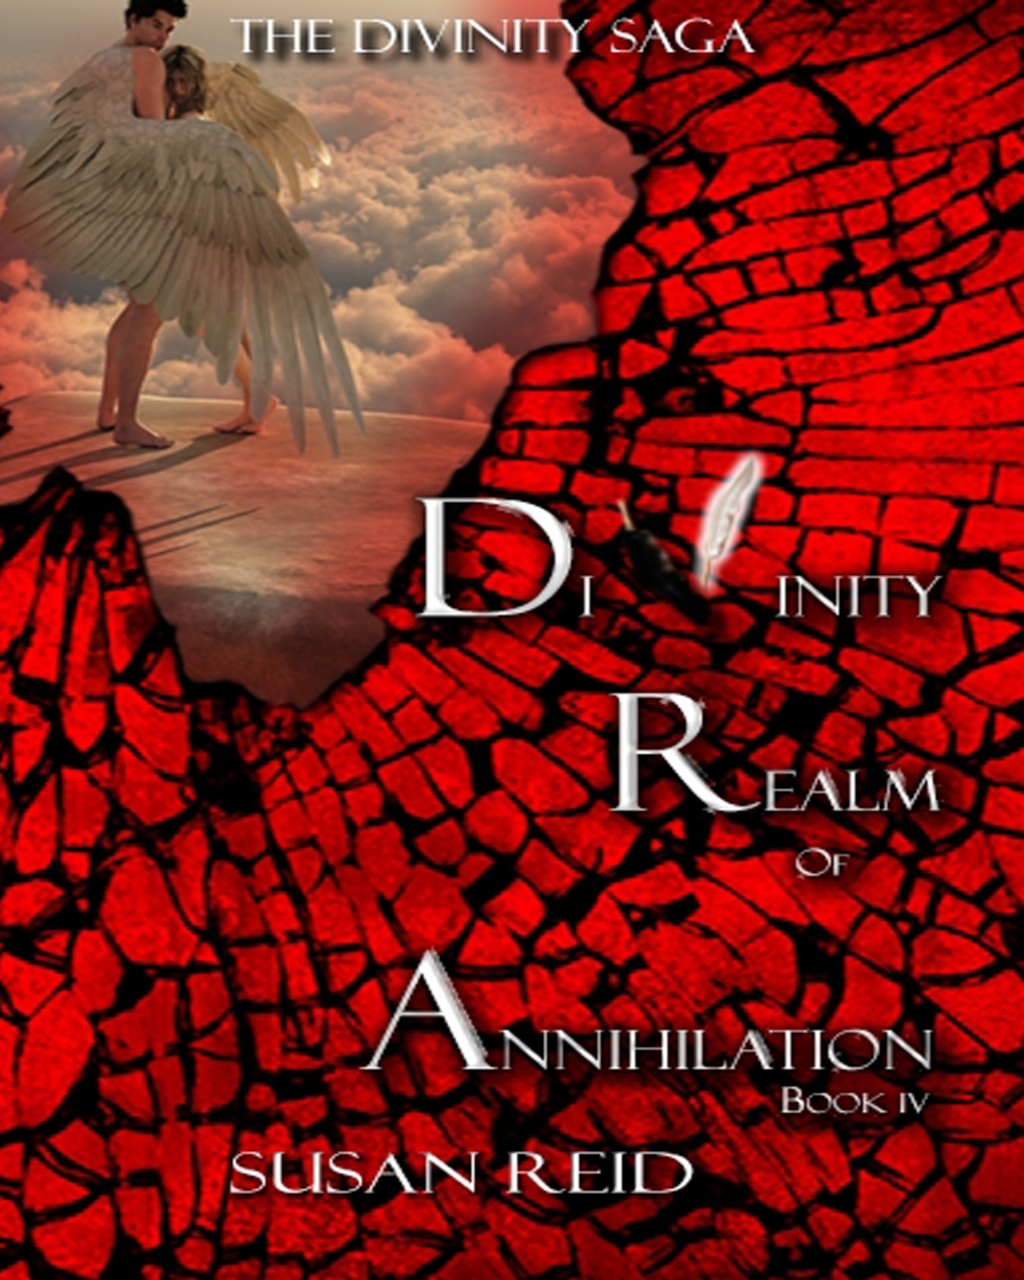 Divinity Realm of annihilation cover 11-6-15 KINDLE and SMASHWORDS 2